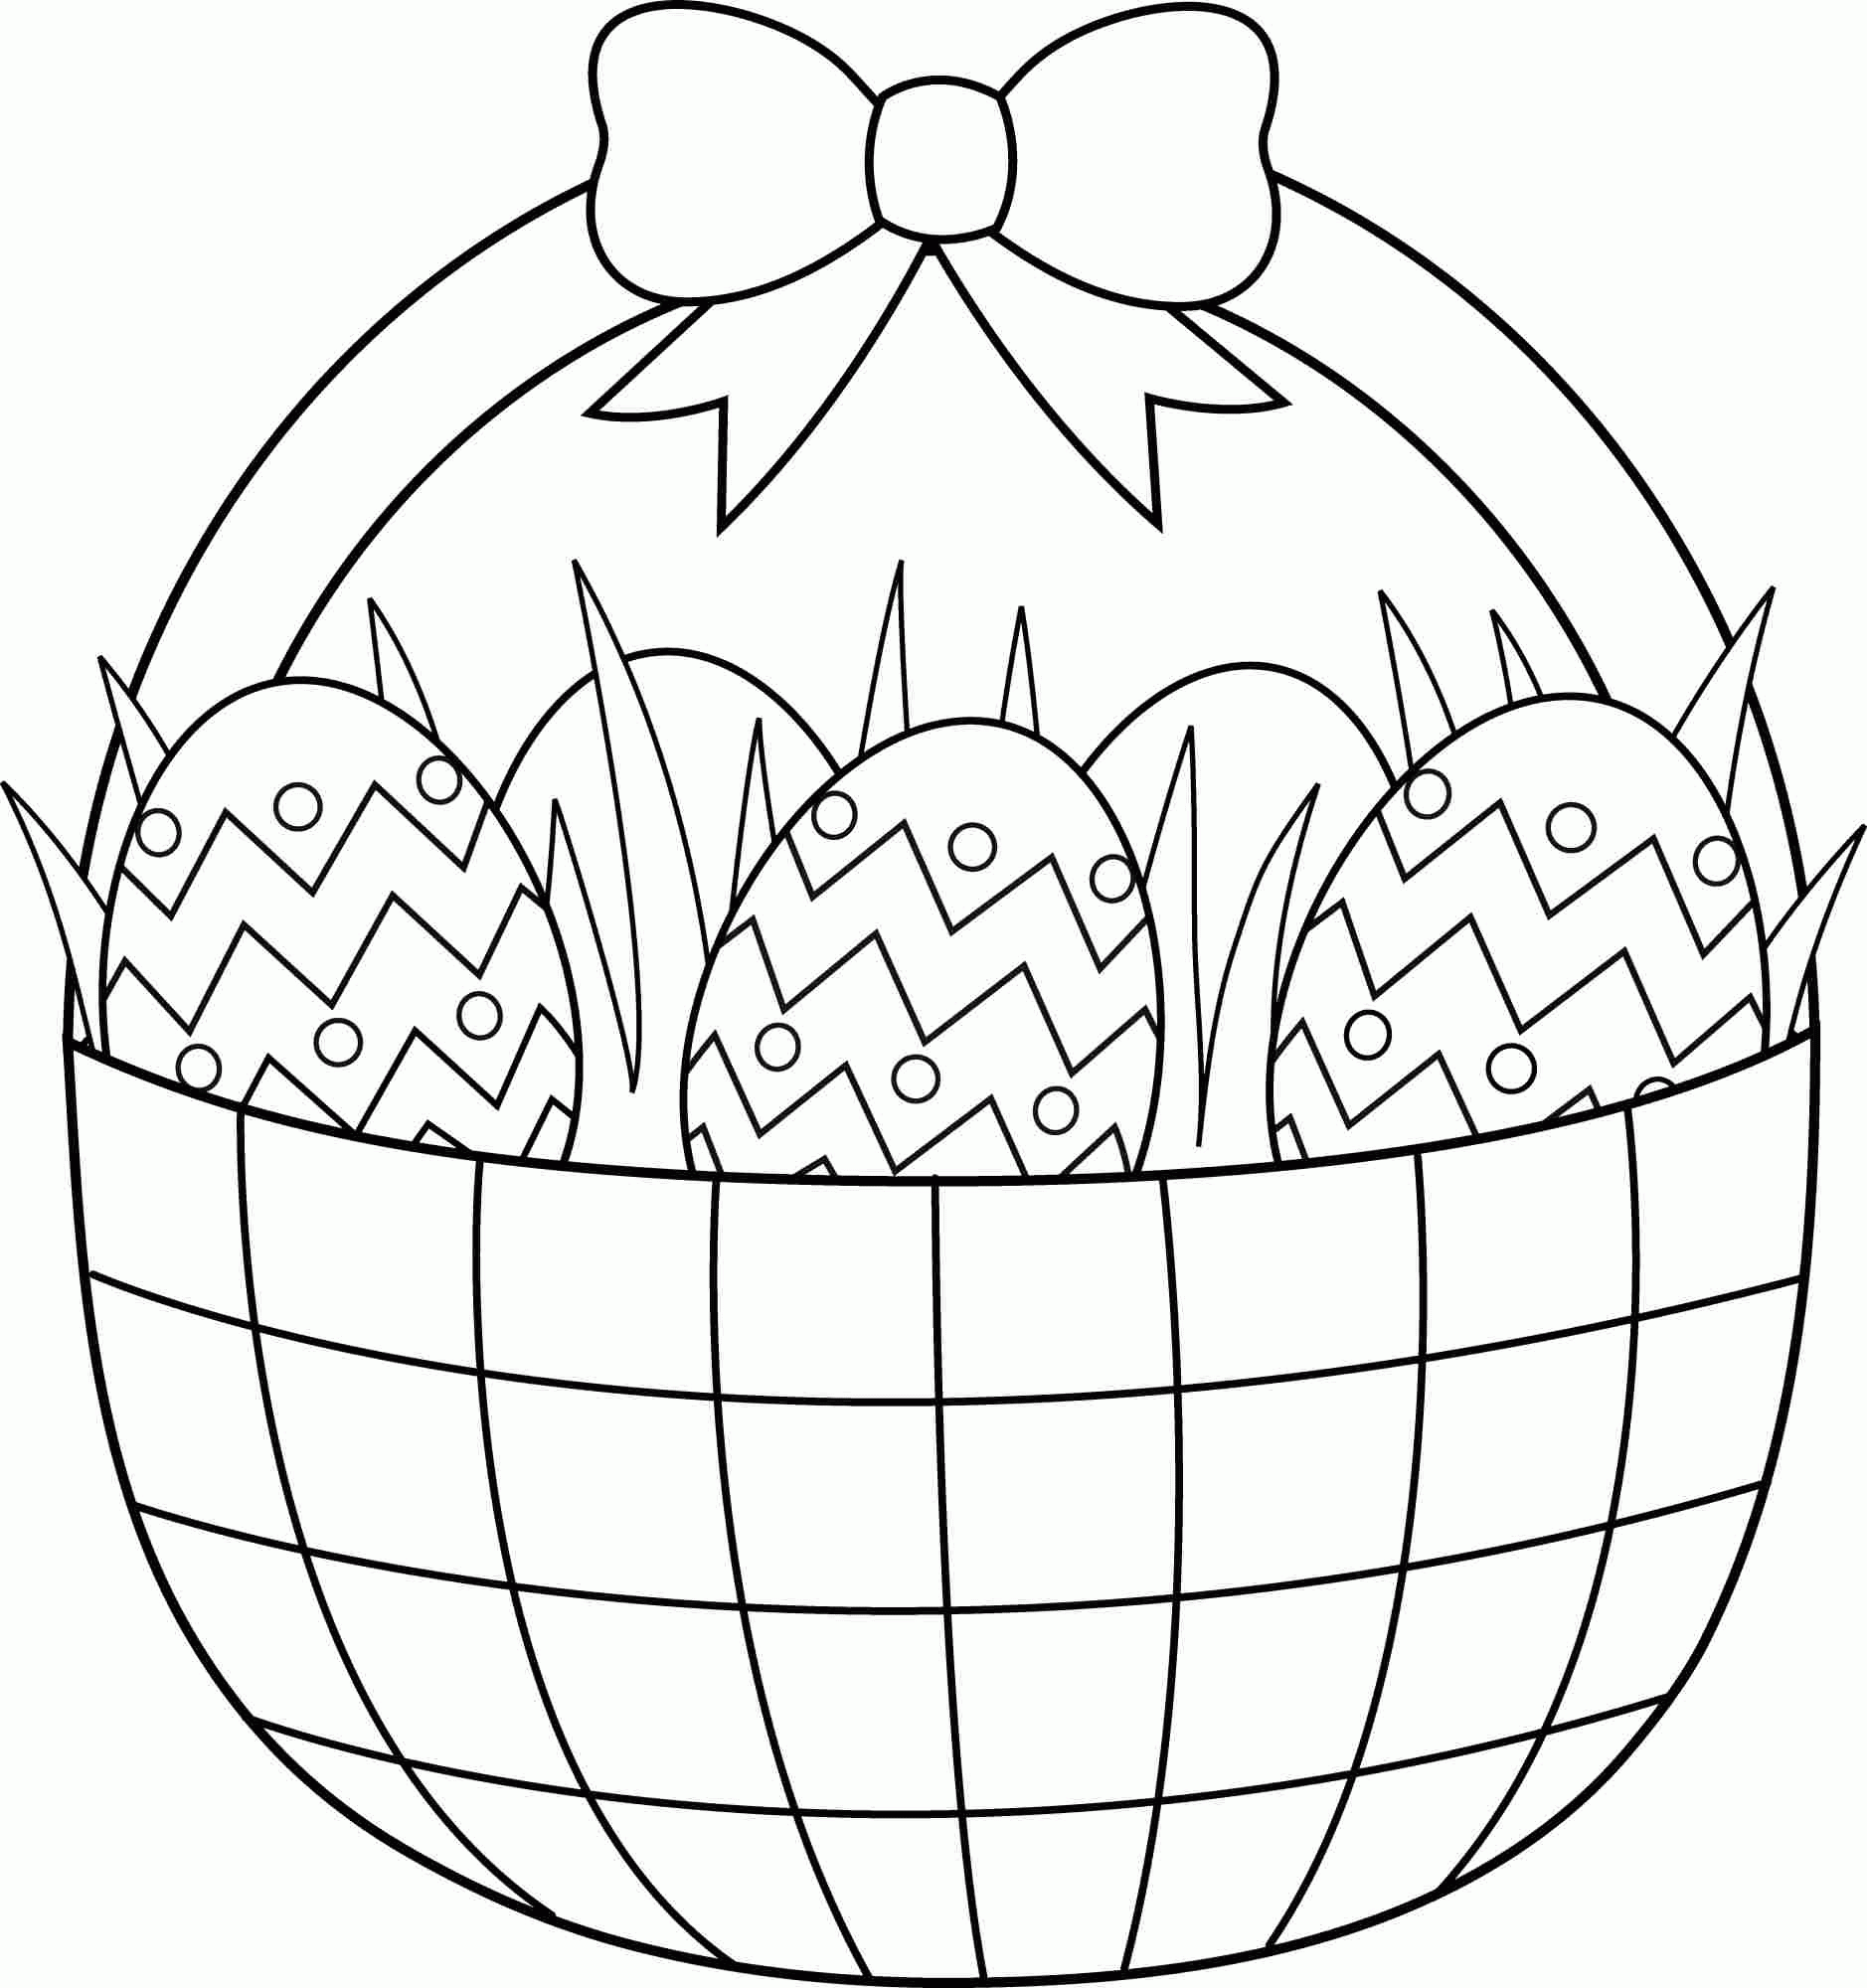 coloring pages pdf download